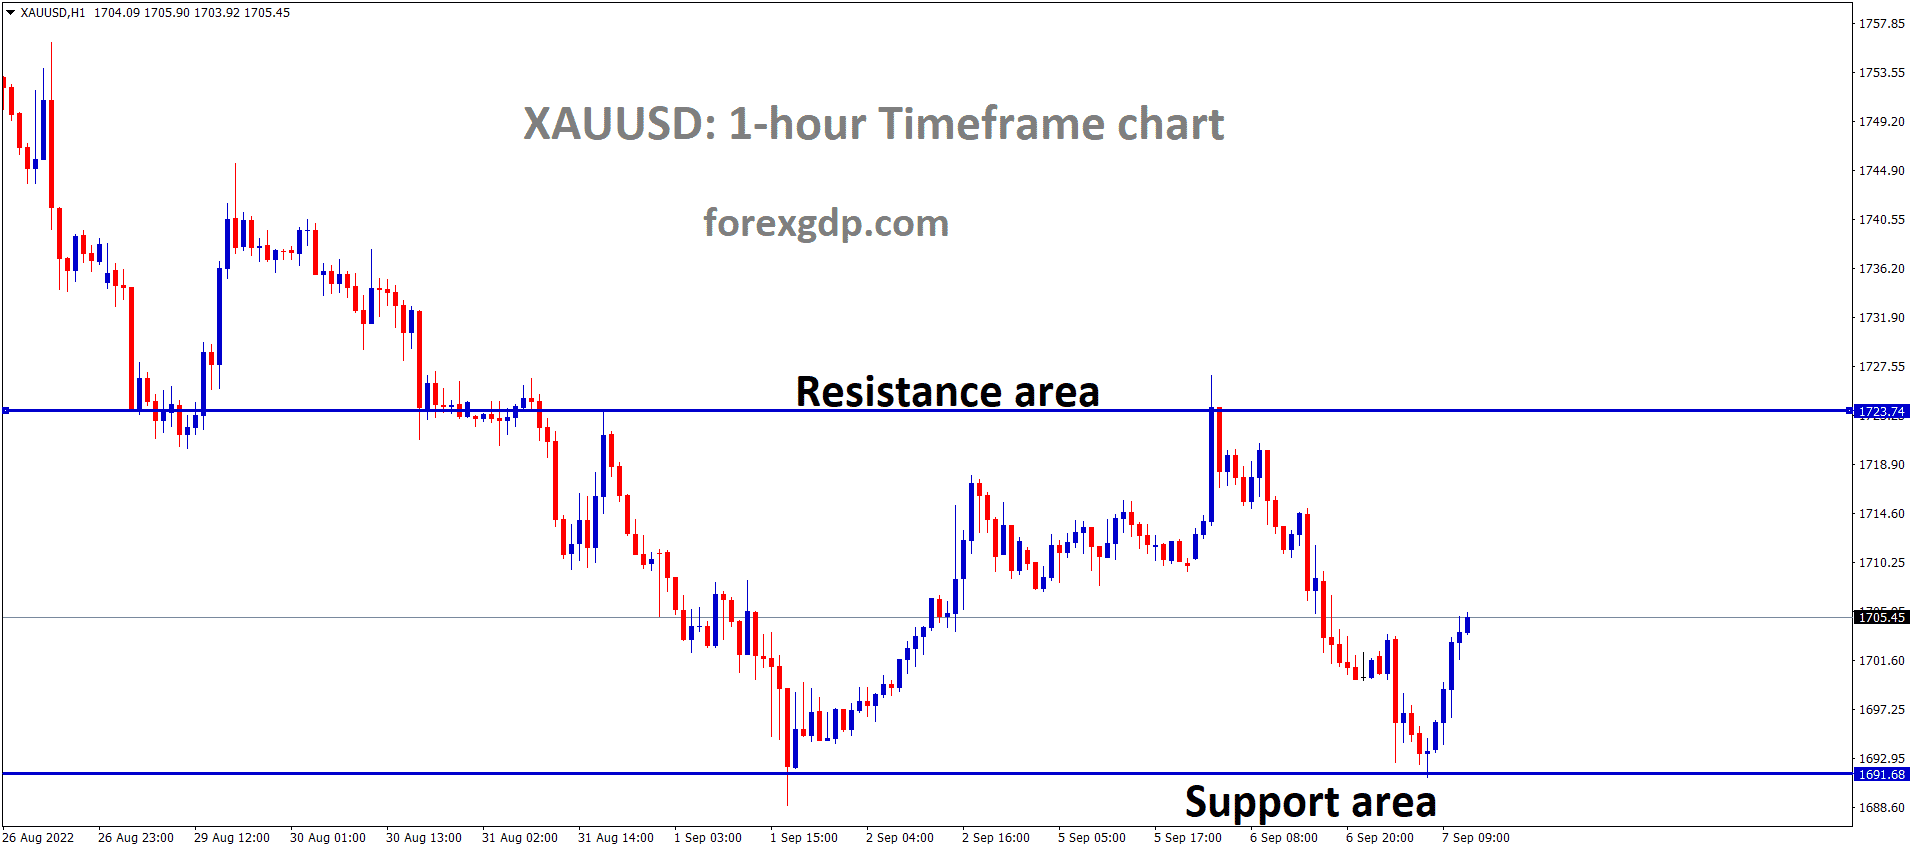 XAUUSD Gold price is moving in the Box pattern and the market has rebounded from the horizontal support area of the pattern. 1